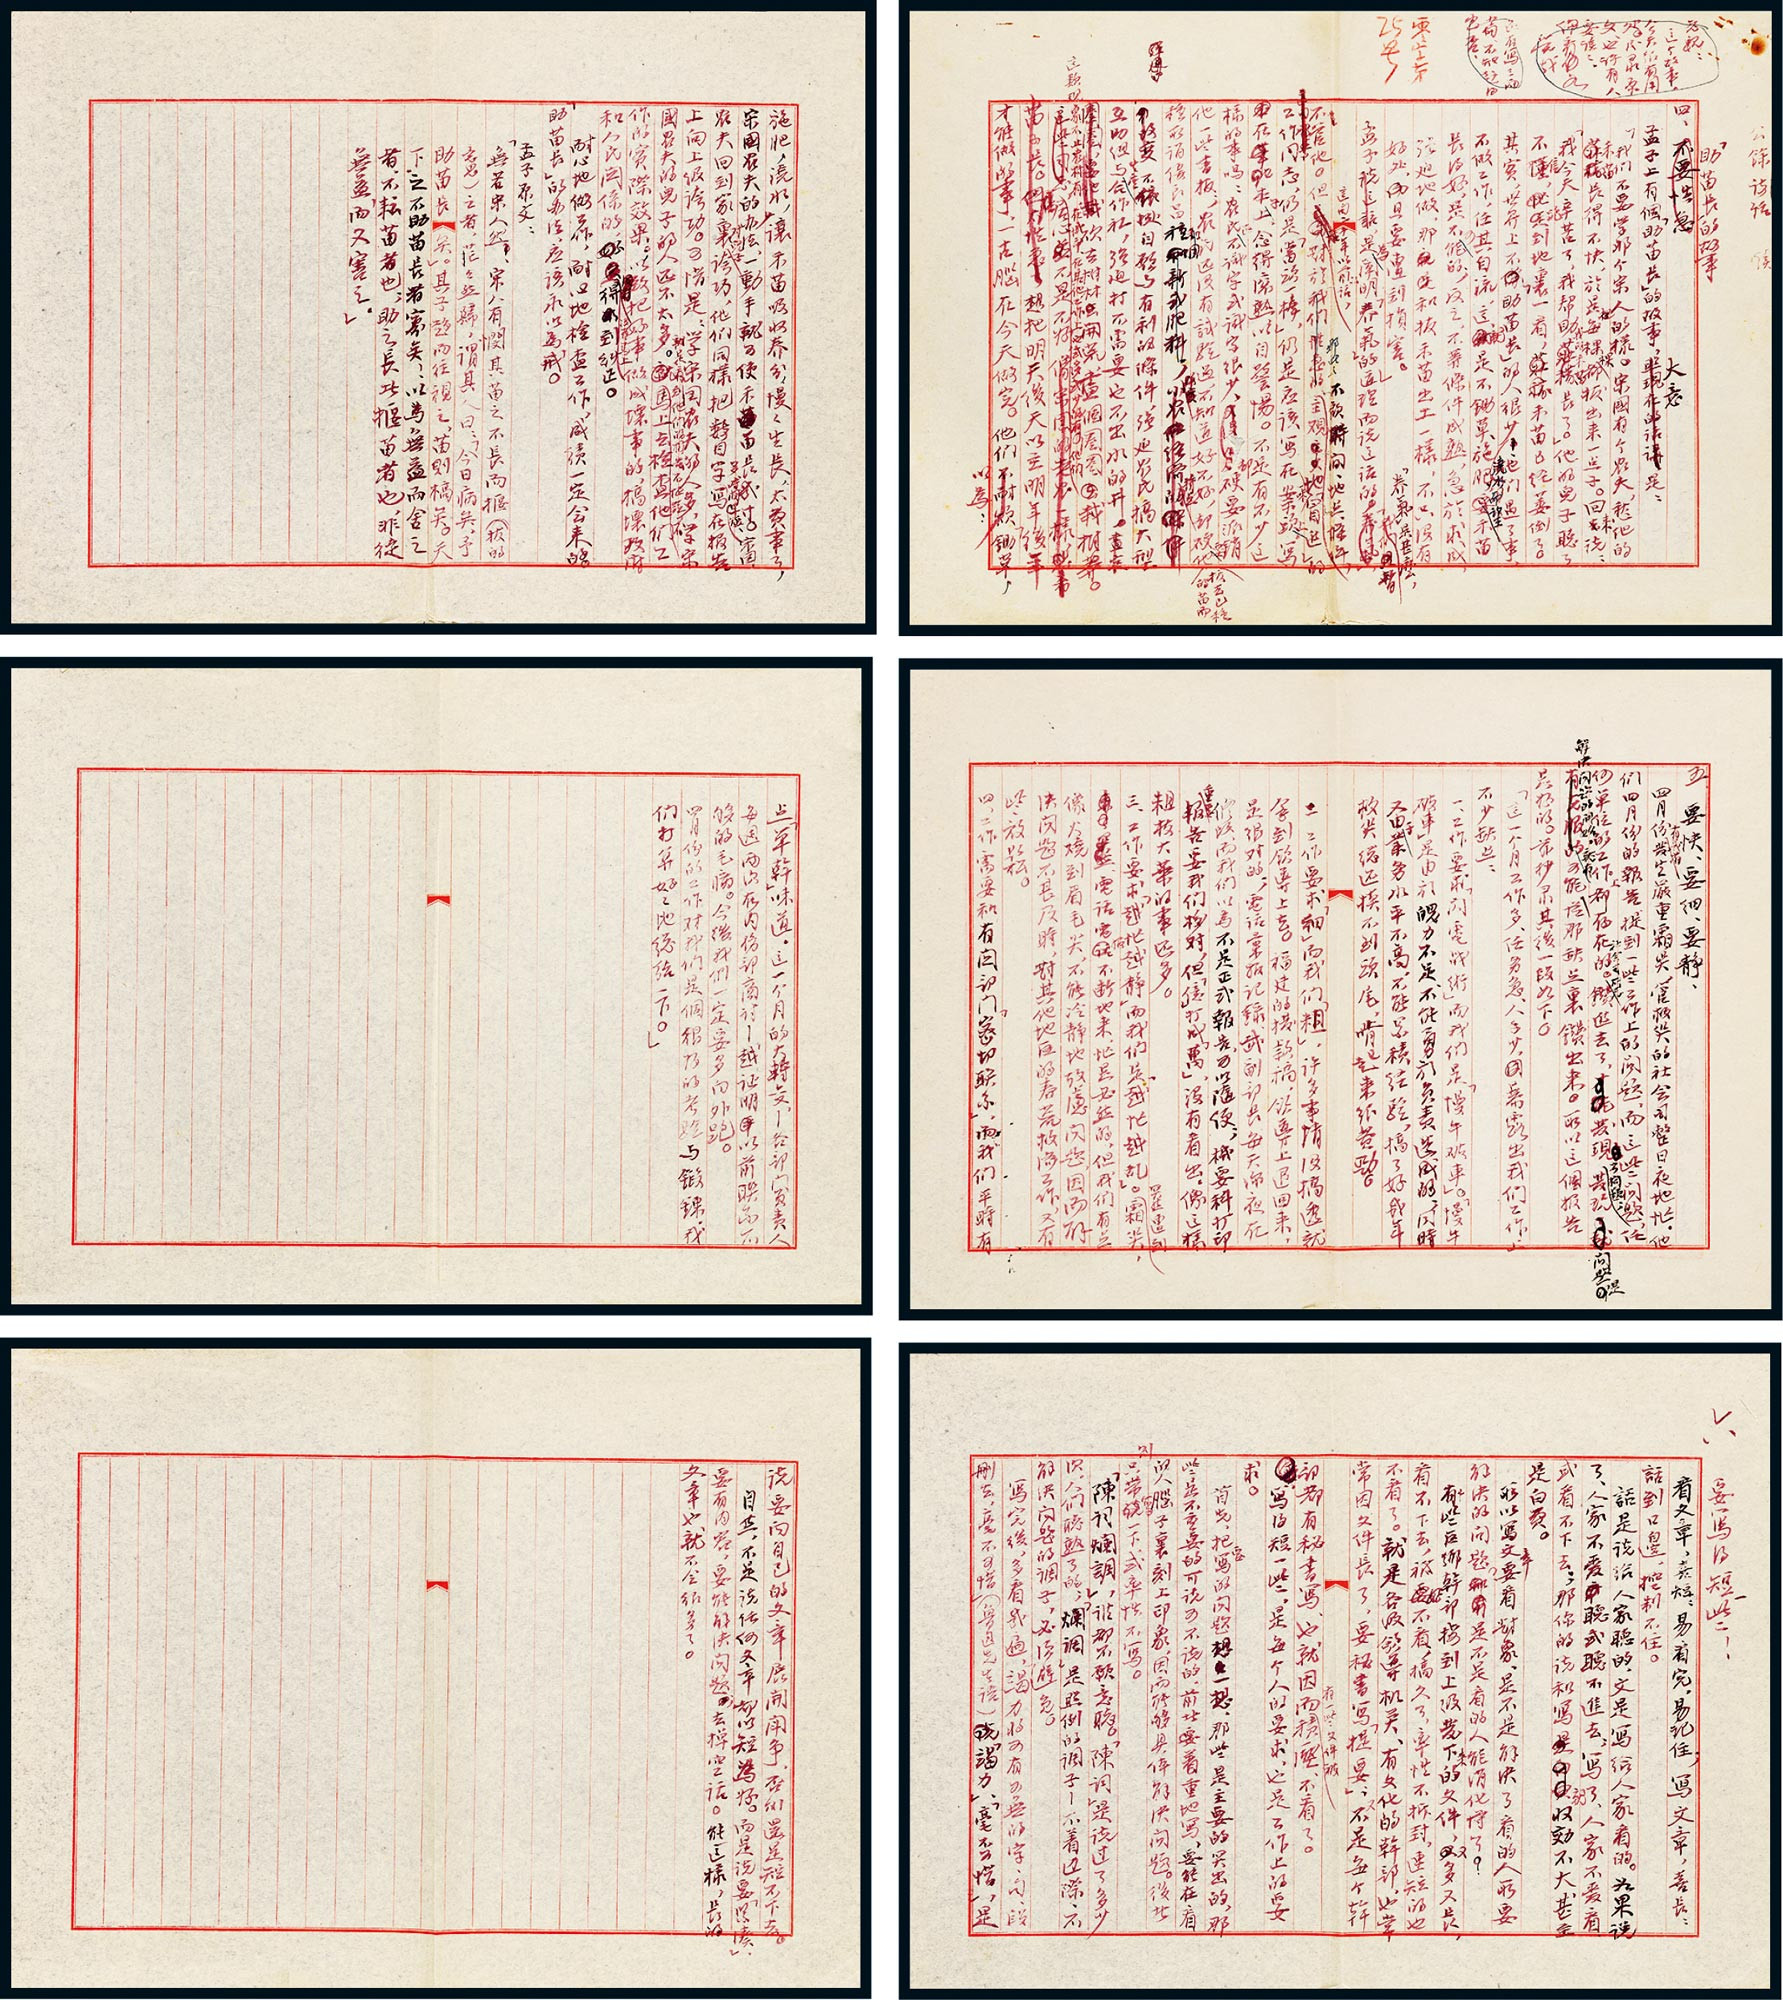 The manuscript of “plucking up a crop to help it” by Xie Juezai in brush script 6 pages in 1 copy